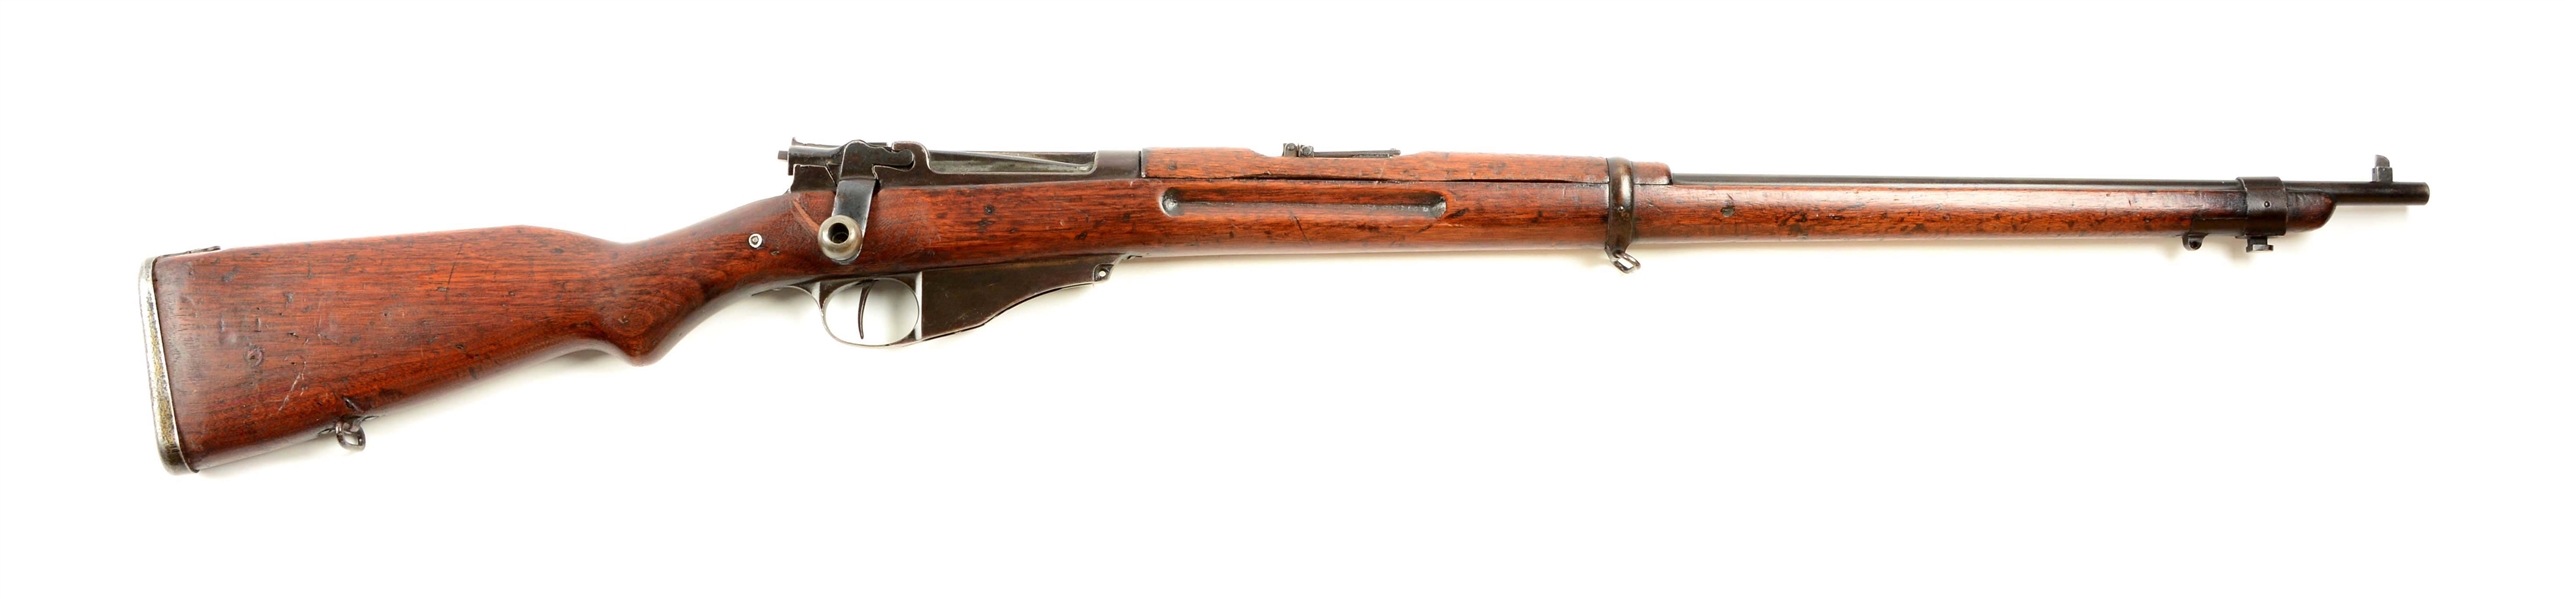 (A) WINCHESTER NAVY STRAIGHT PULL BOLT ACTION RIFLE.